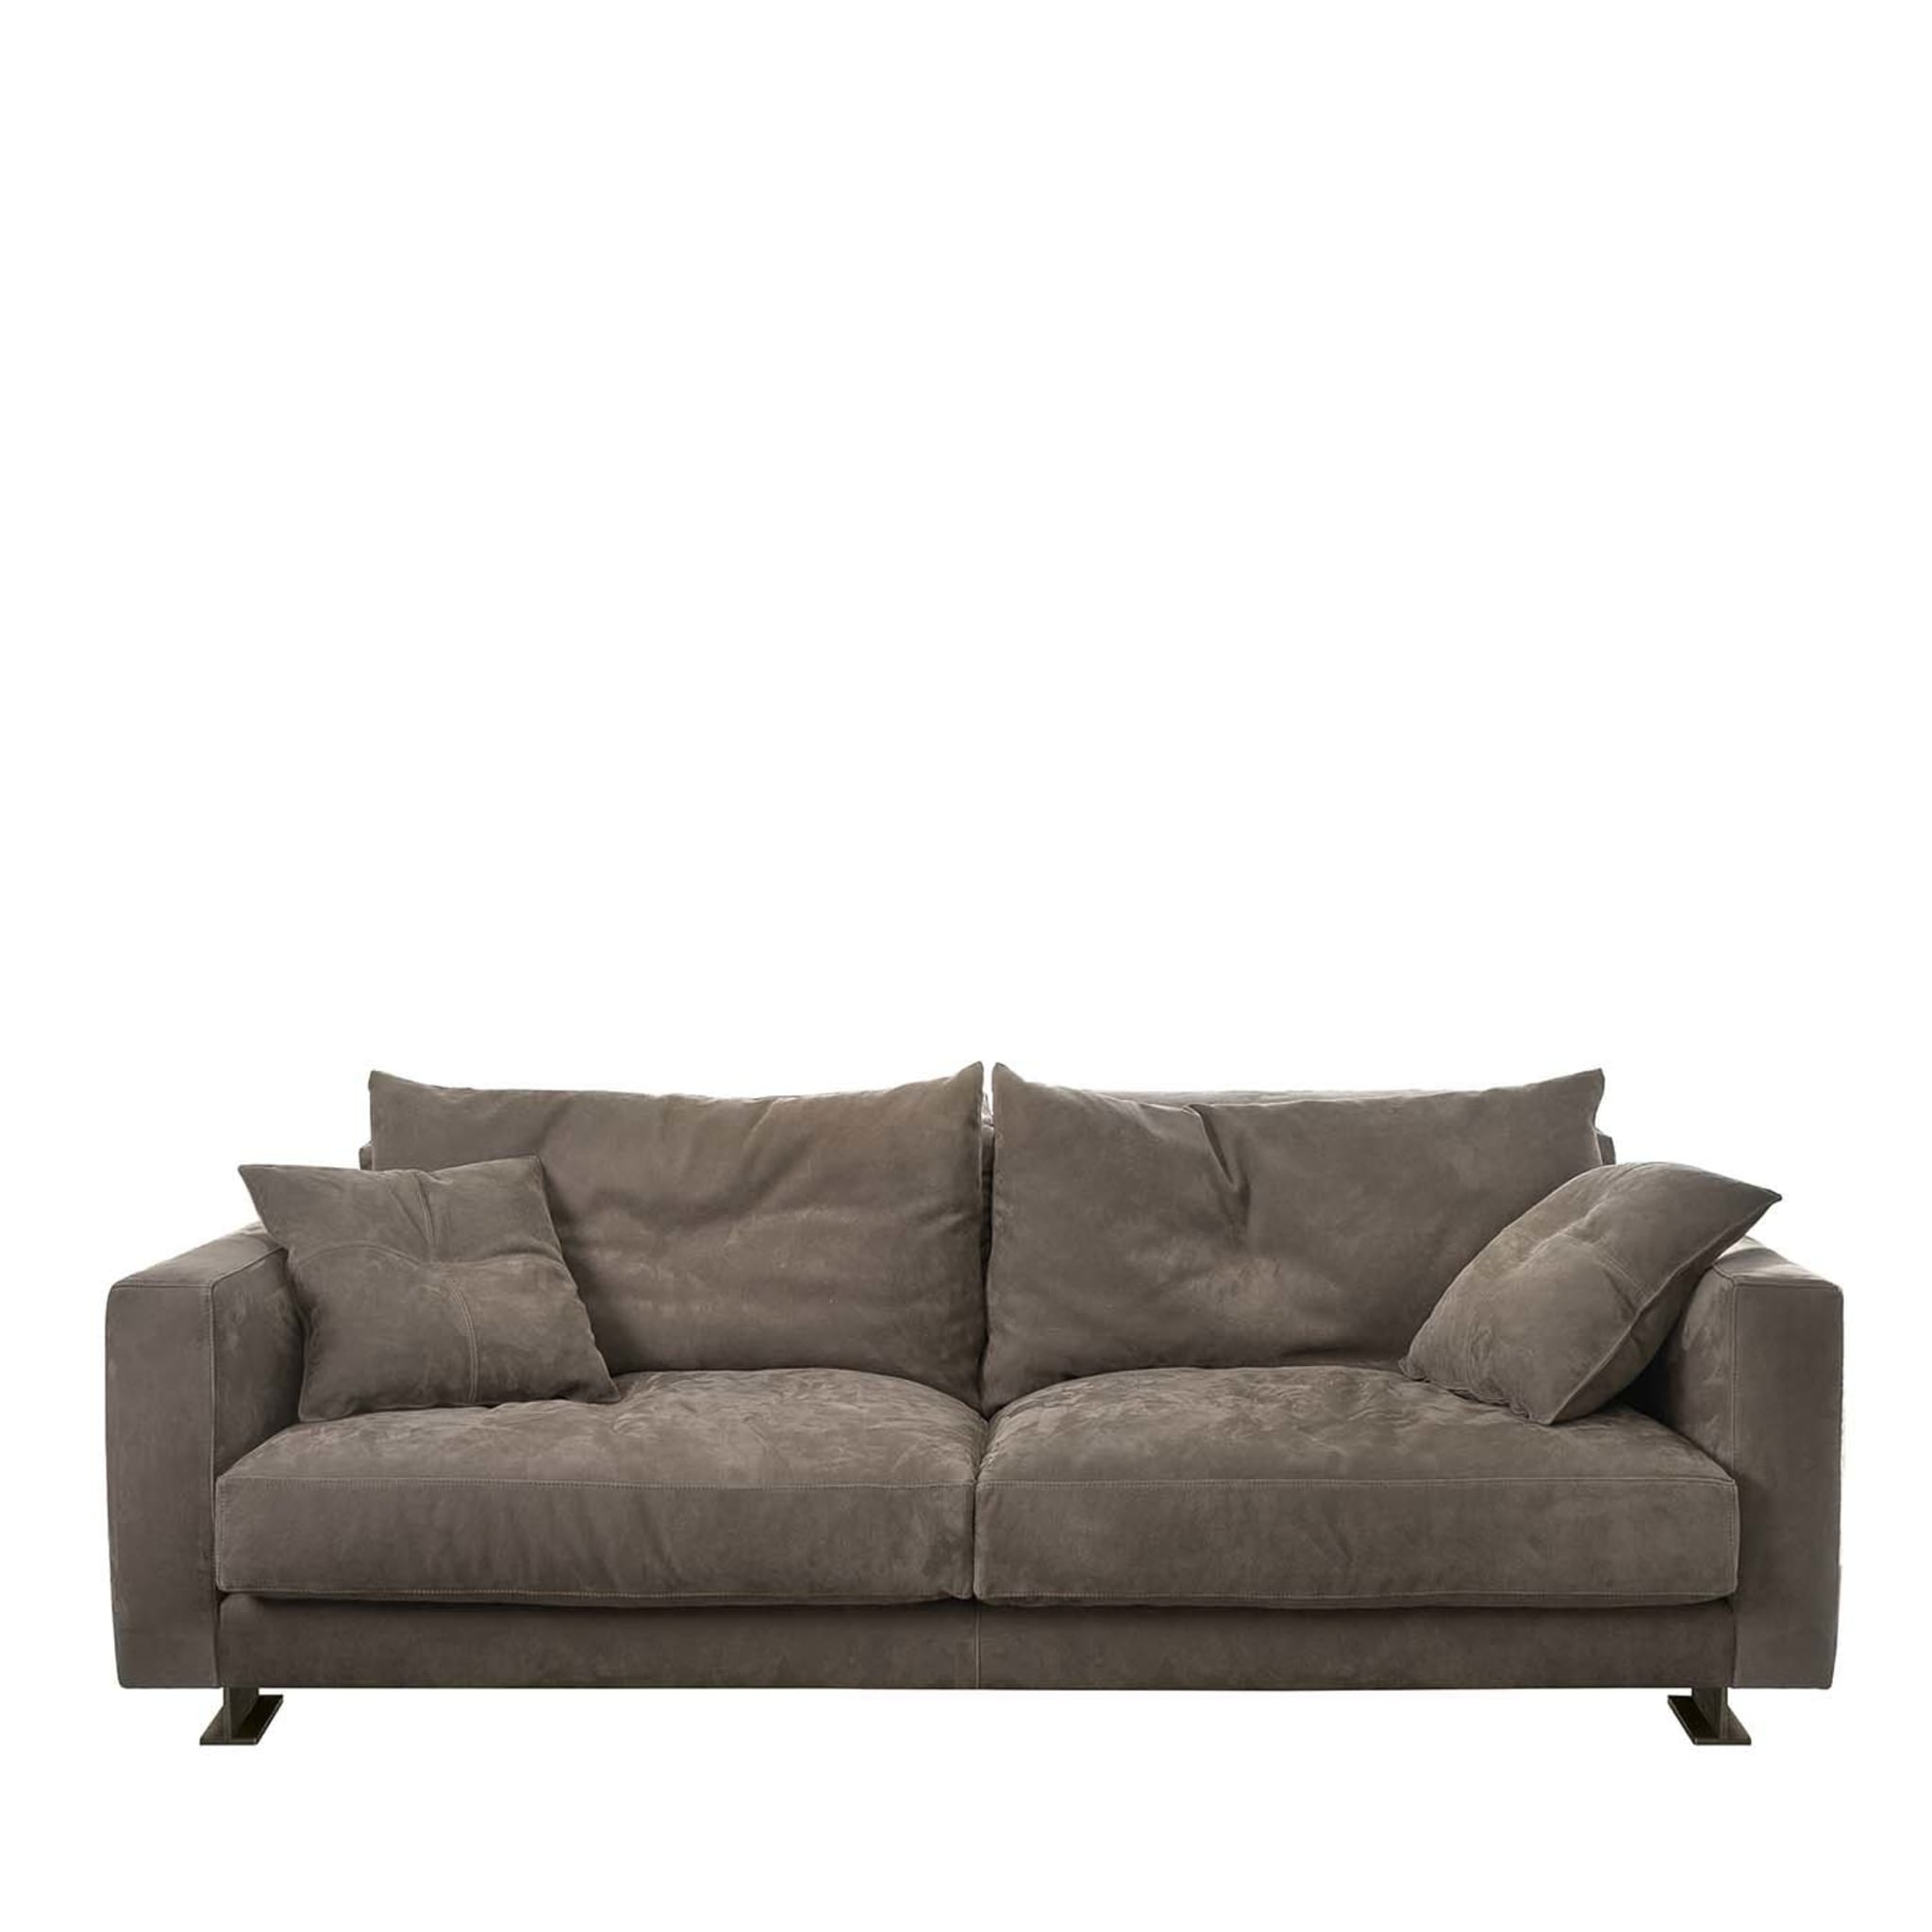 Flap Mink Leather Sofa - Main view